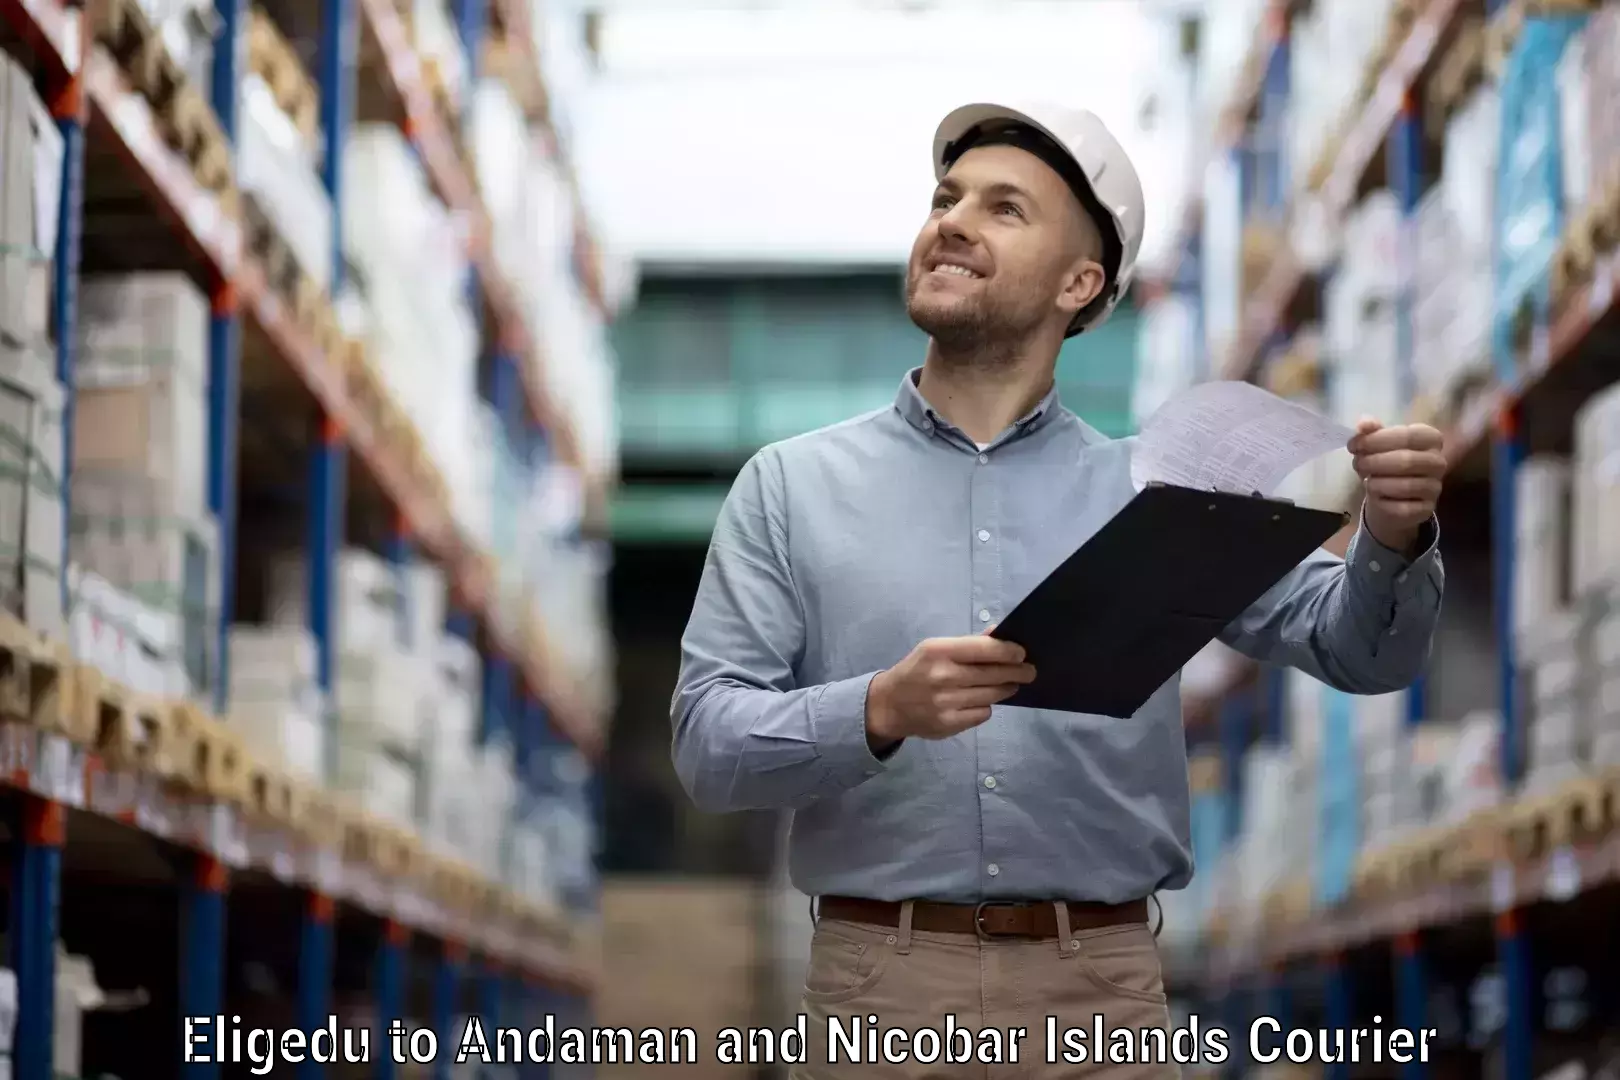 Courier insurance Eligedu to Andaman and Nicobar Islands